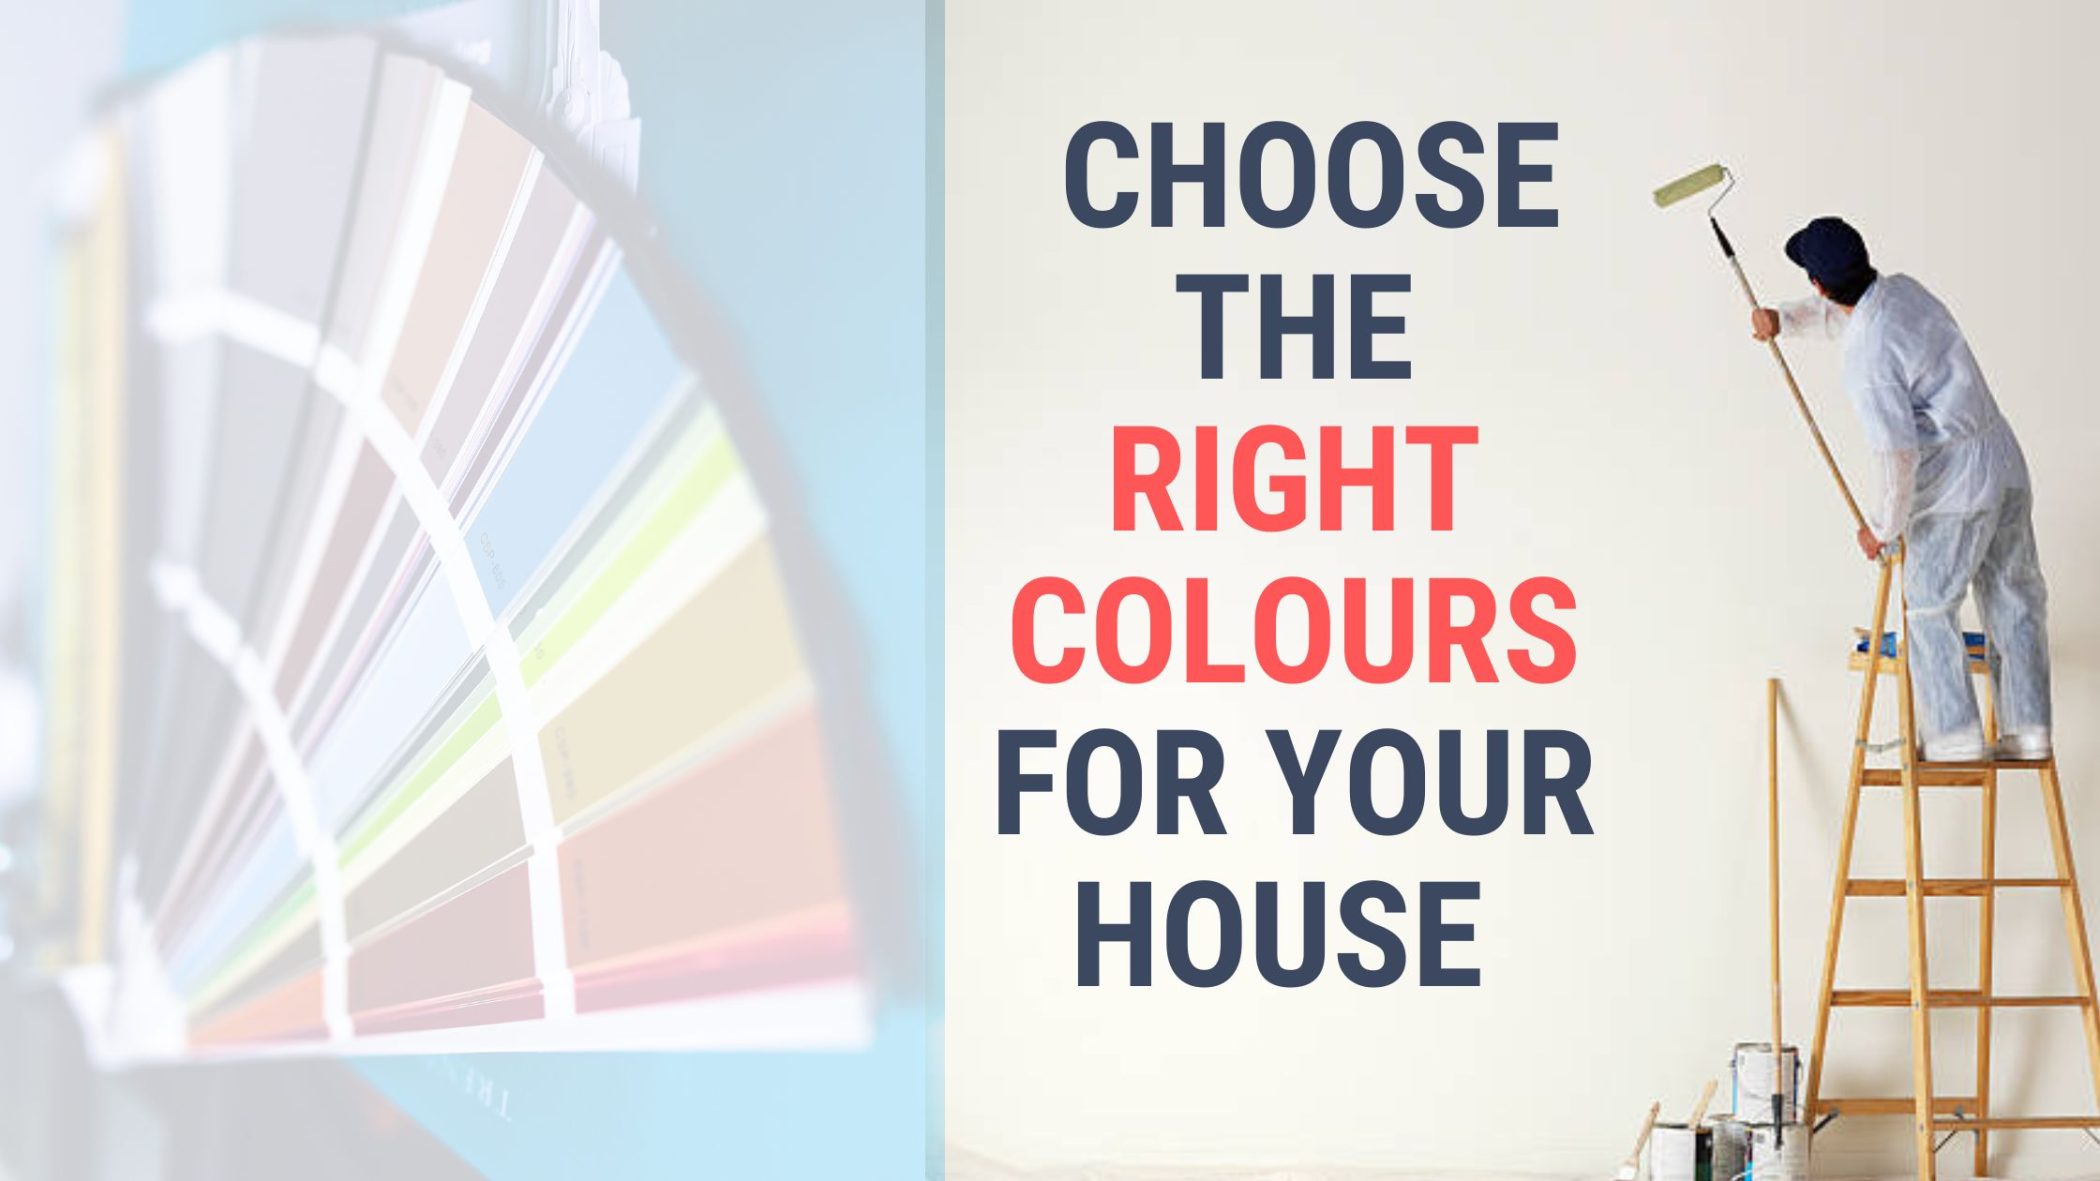 How to choose the right colours for your house